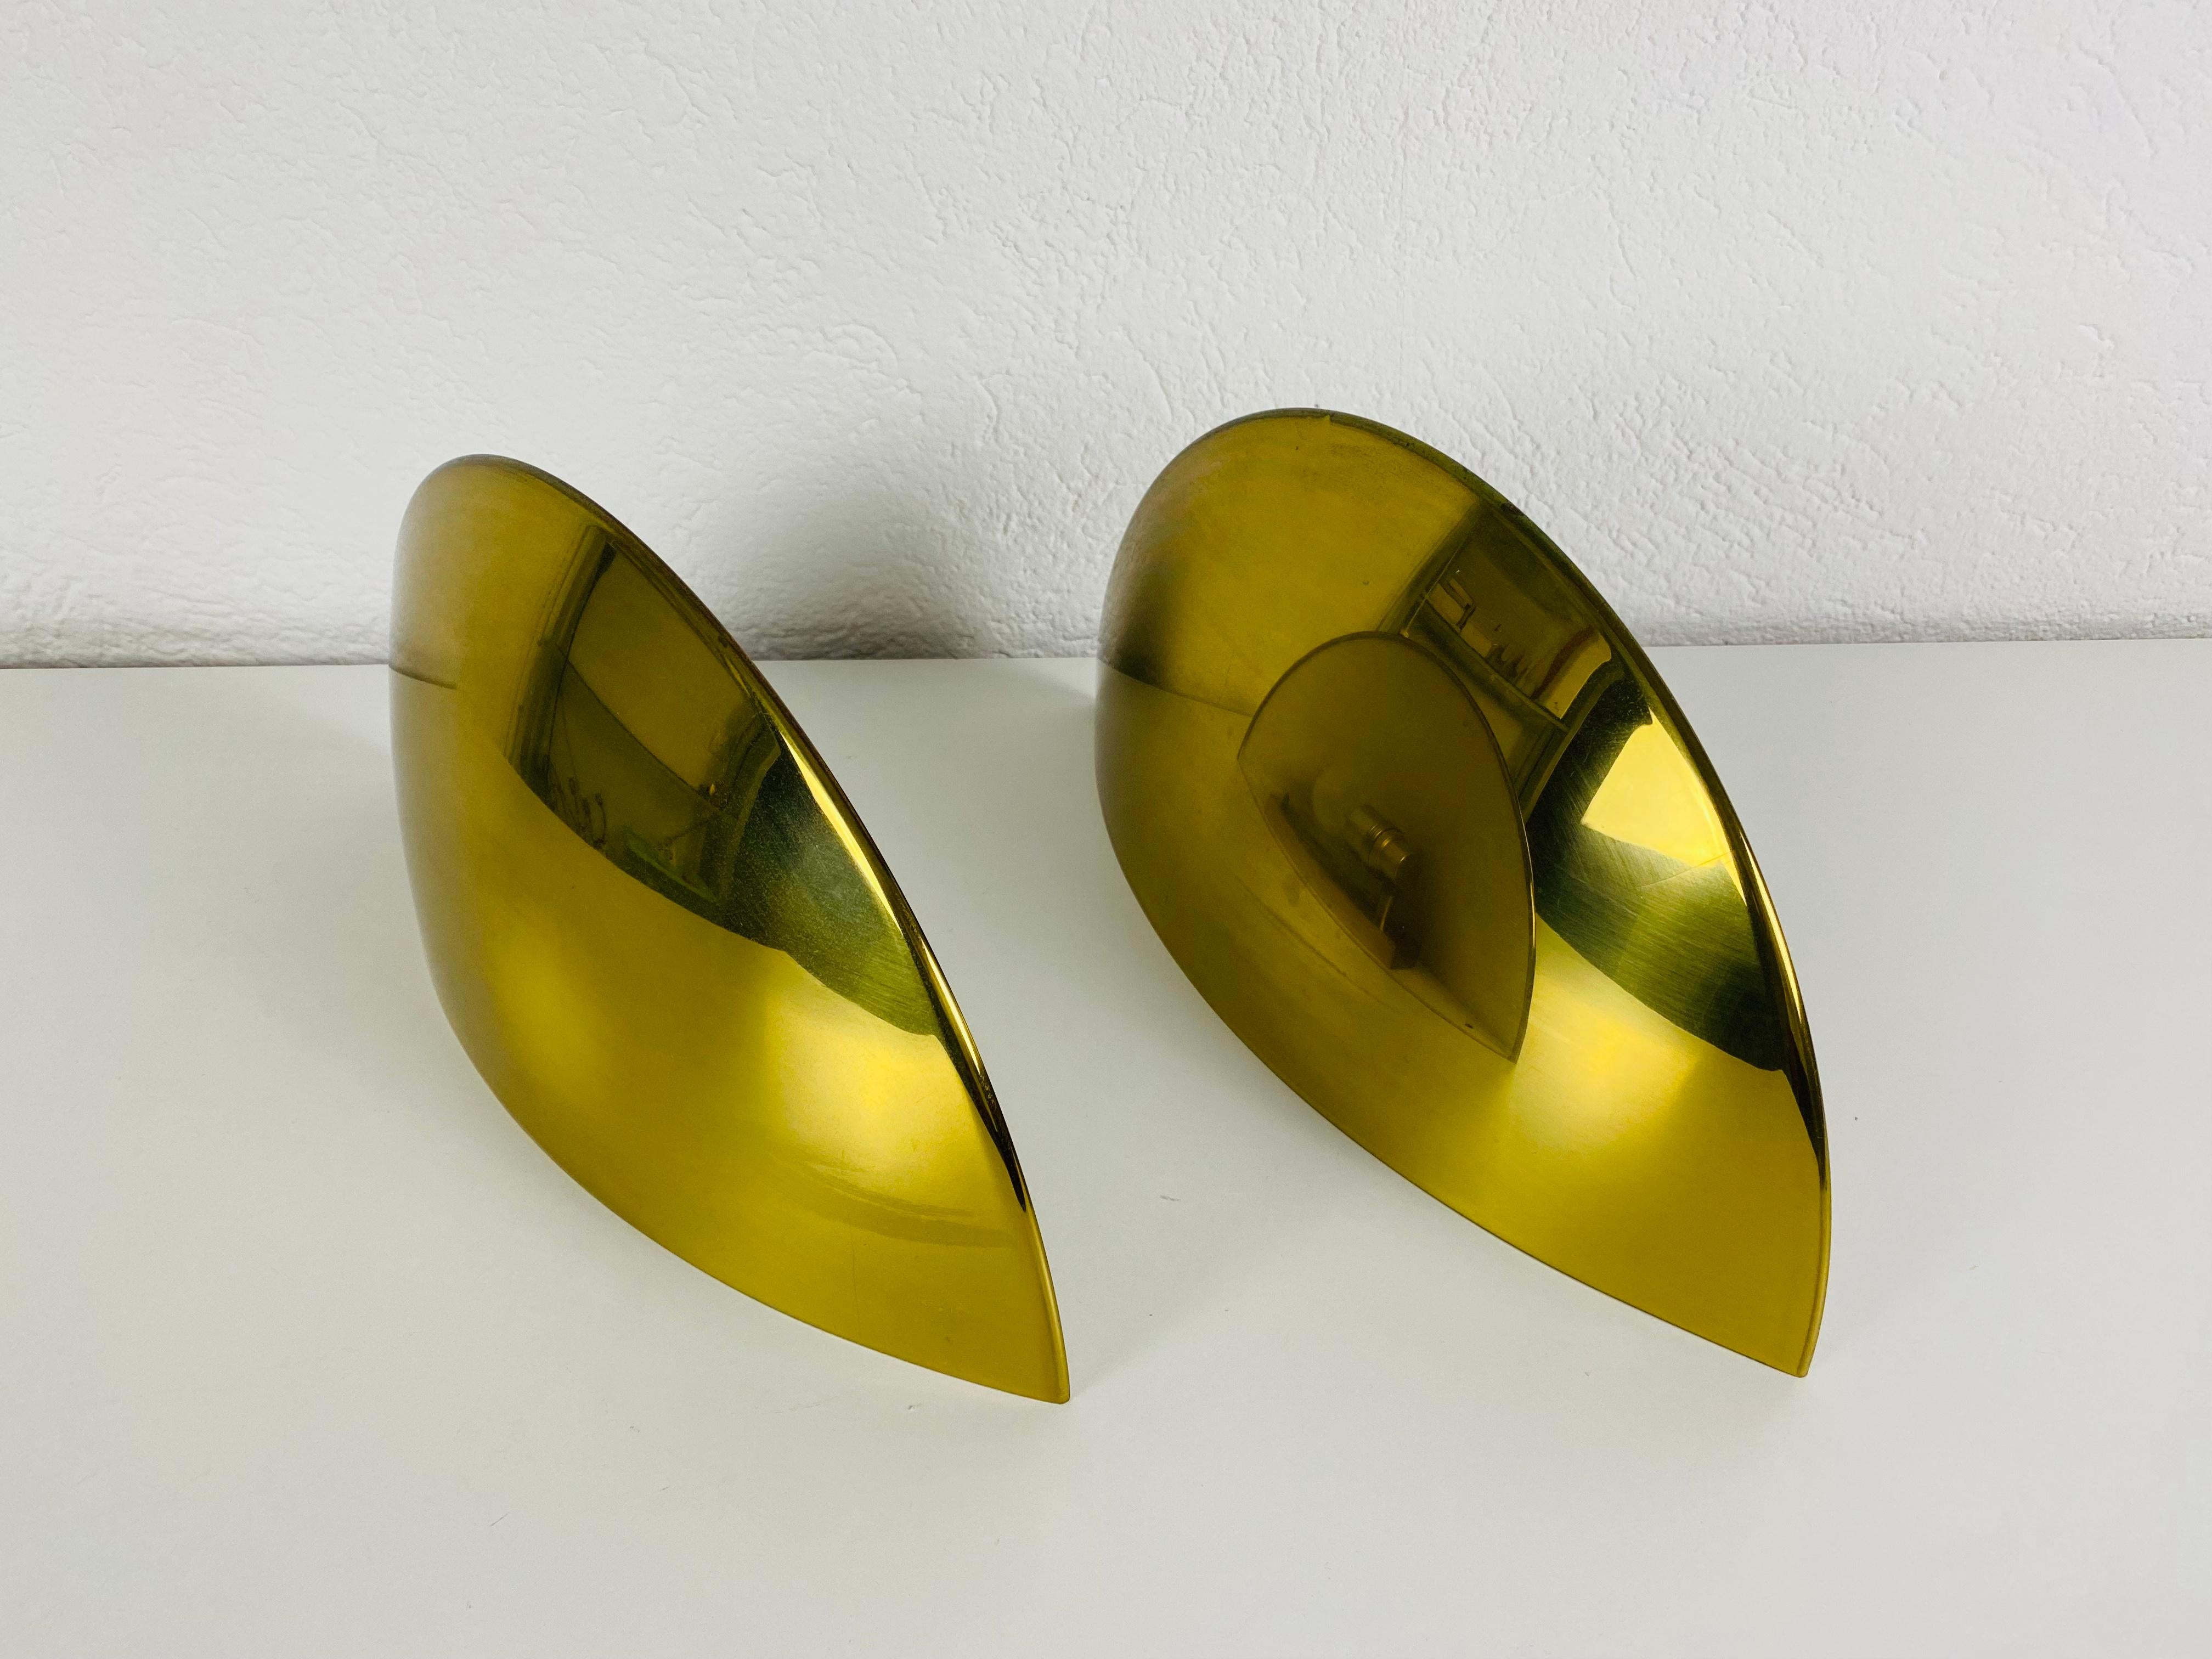 A pair of wall lampst by Florian Schulz made in Germany in the 1960s. It is fascinating with its gilt brass shade. 

The light requires E27 light bulbs. Works with both 110/220 V. Good vintage condition.

Free worldwide express shipping.